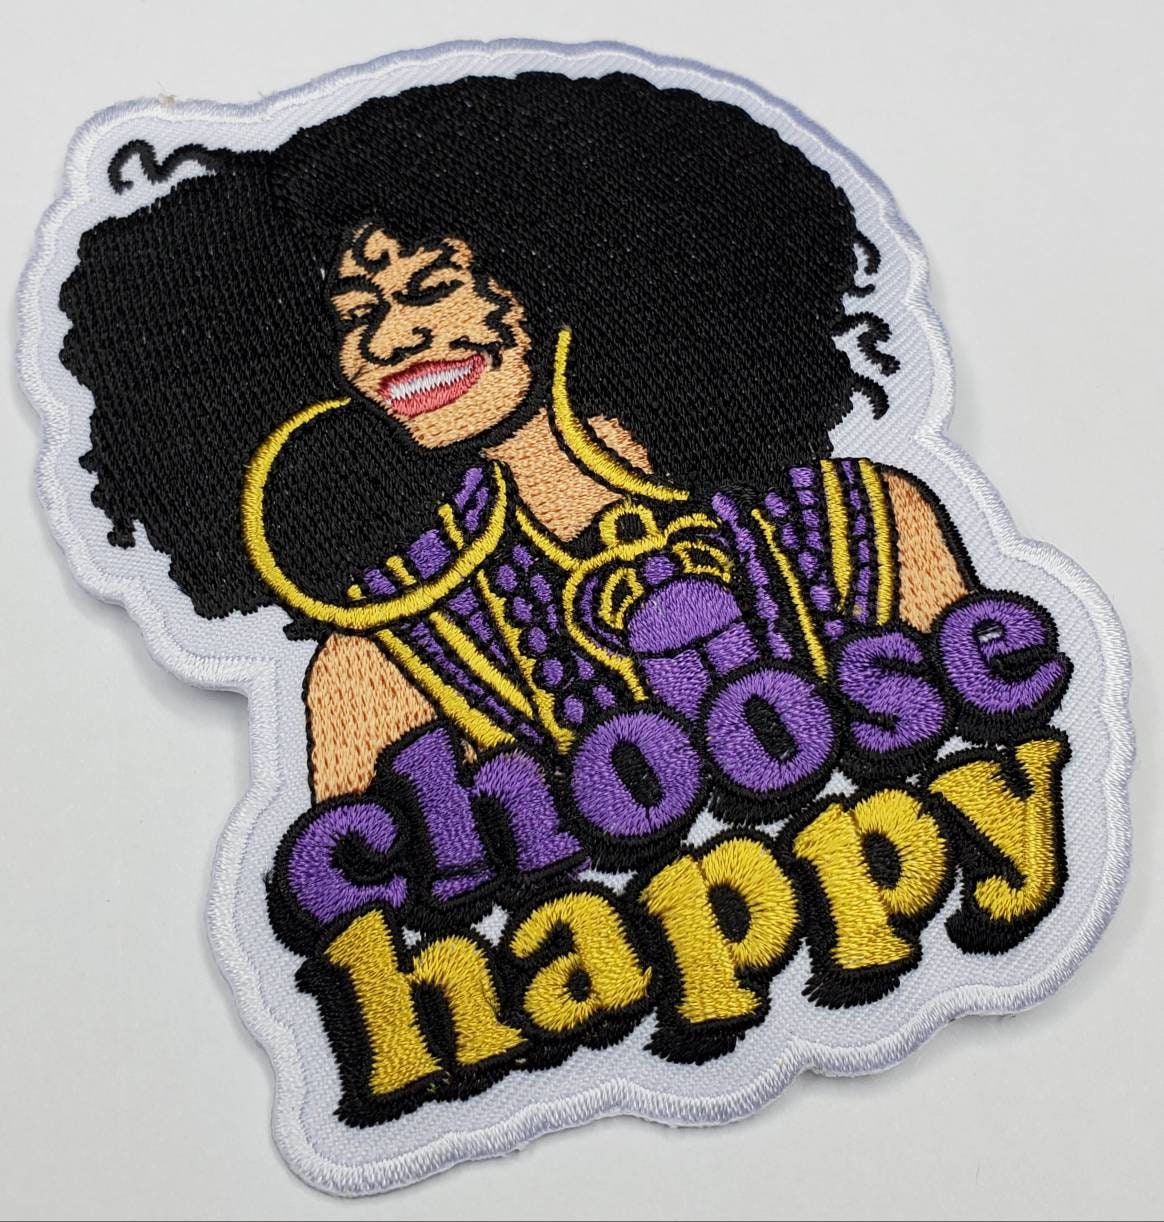 Inspirational "Choose Happy" Iron-on Patch; Beautiful Patch, Size 4" Embroidered Patch; Empowerment Badge; Patch for Jackets and Accessories